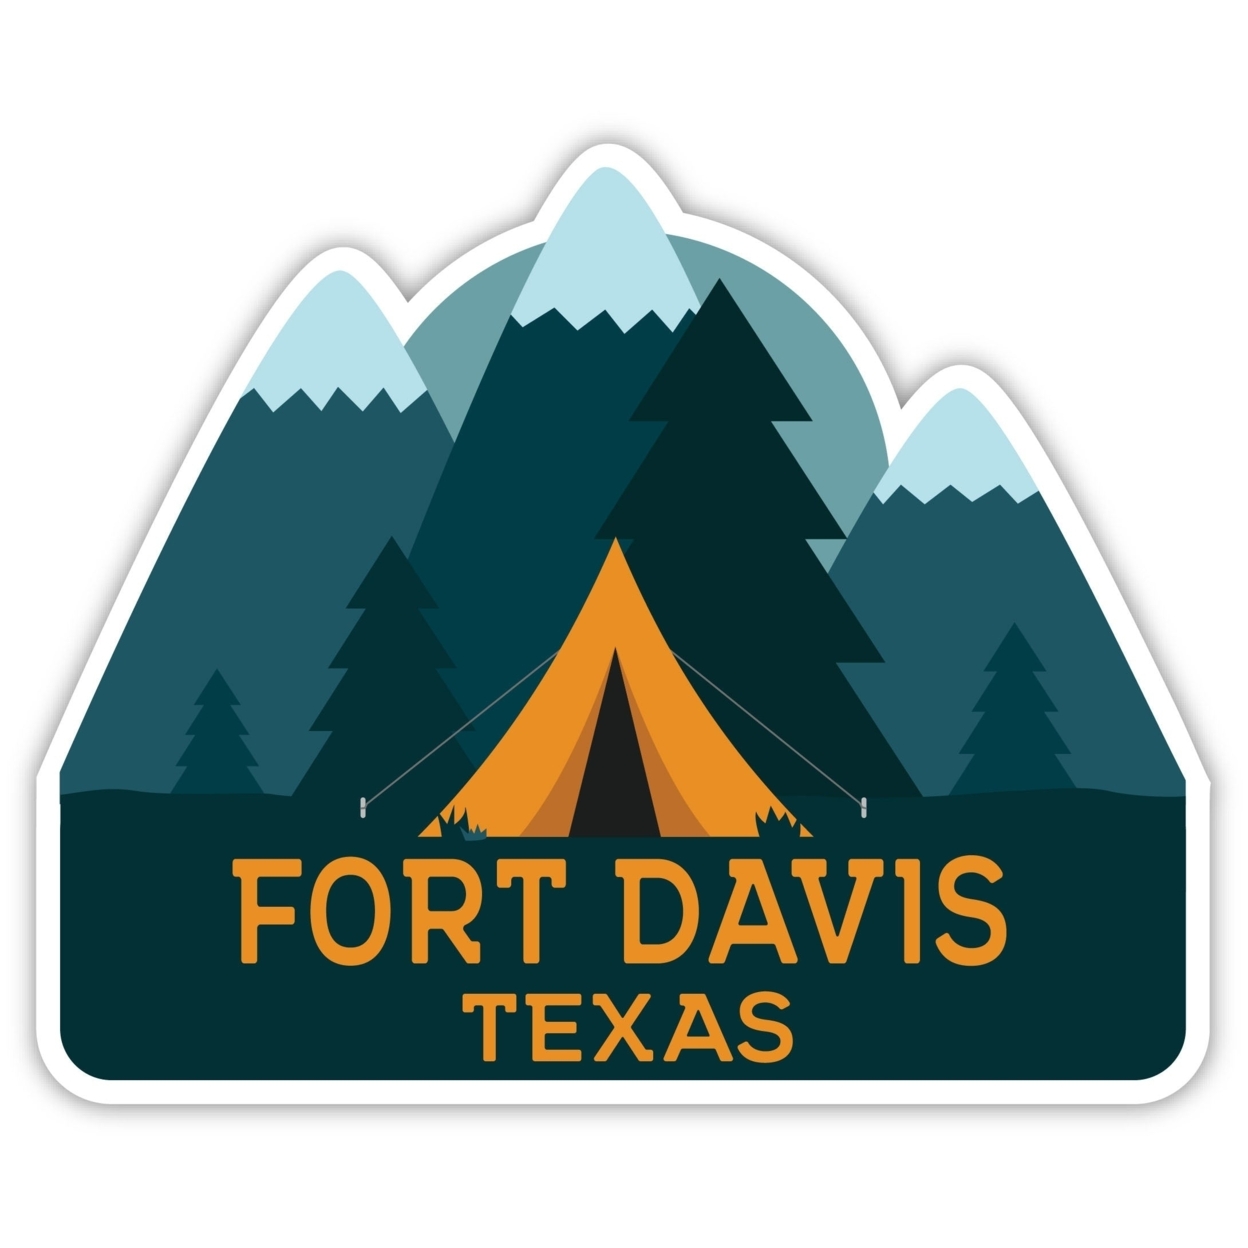 Fort Davis Texas Souvenir Decorative Stickers (Choose Theme And Size) - 4-Pack, 12-Inch, Tent